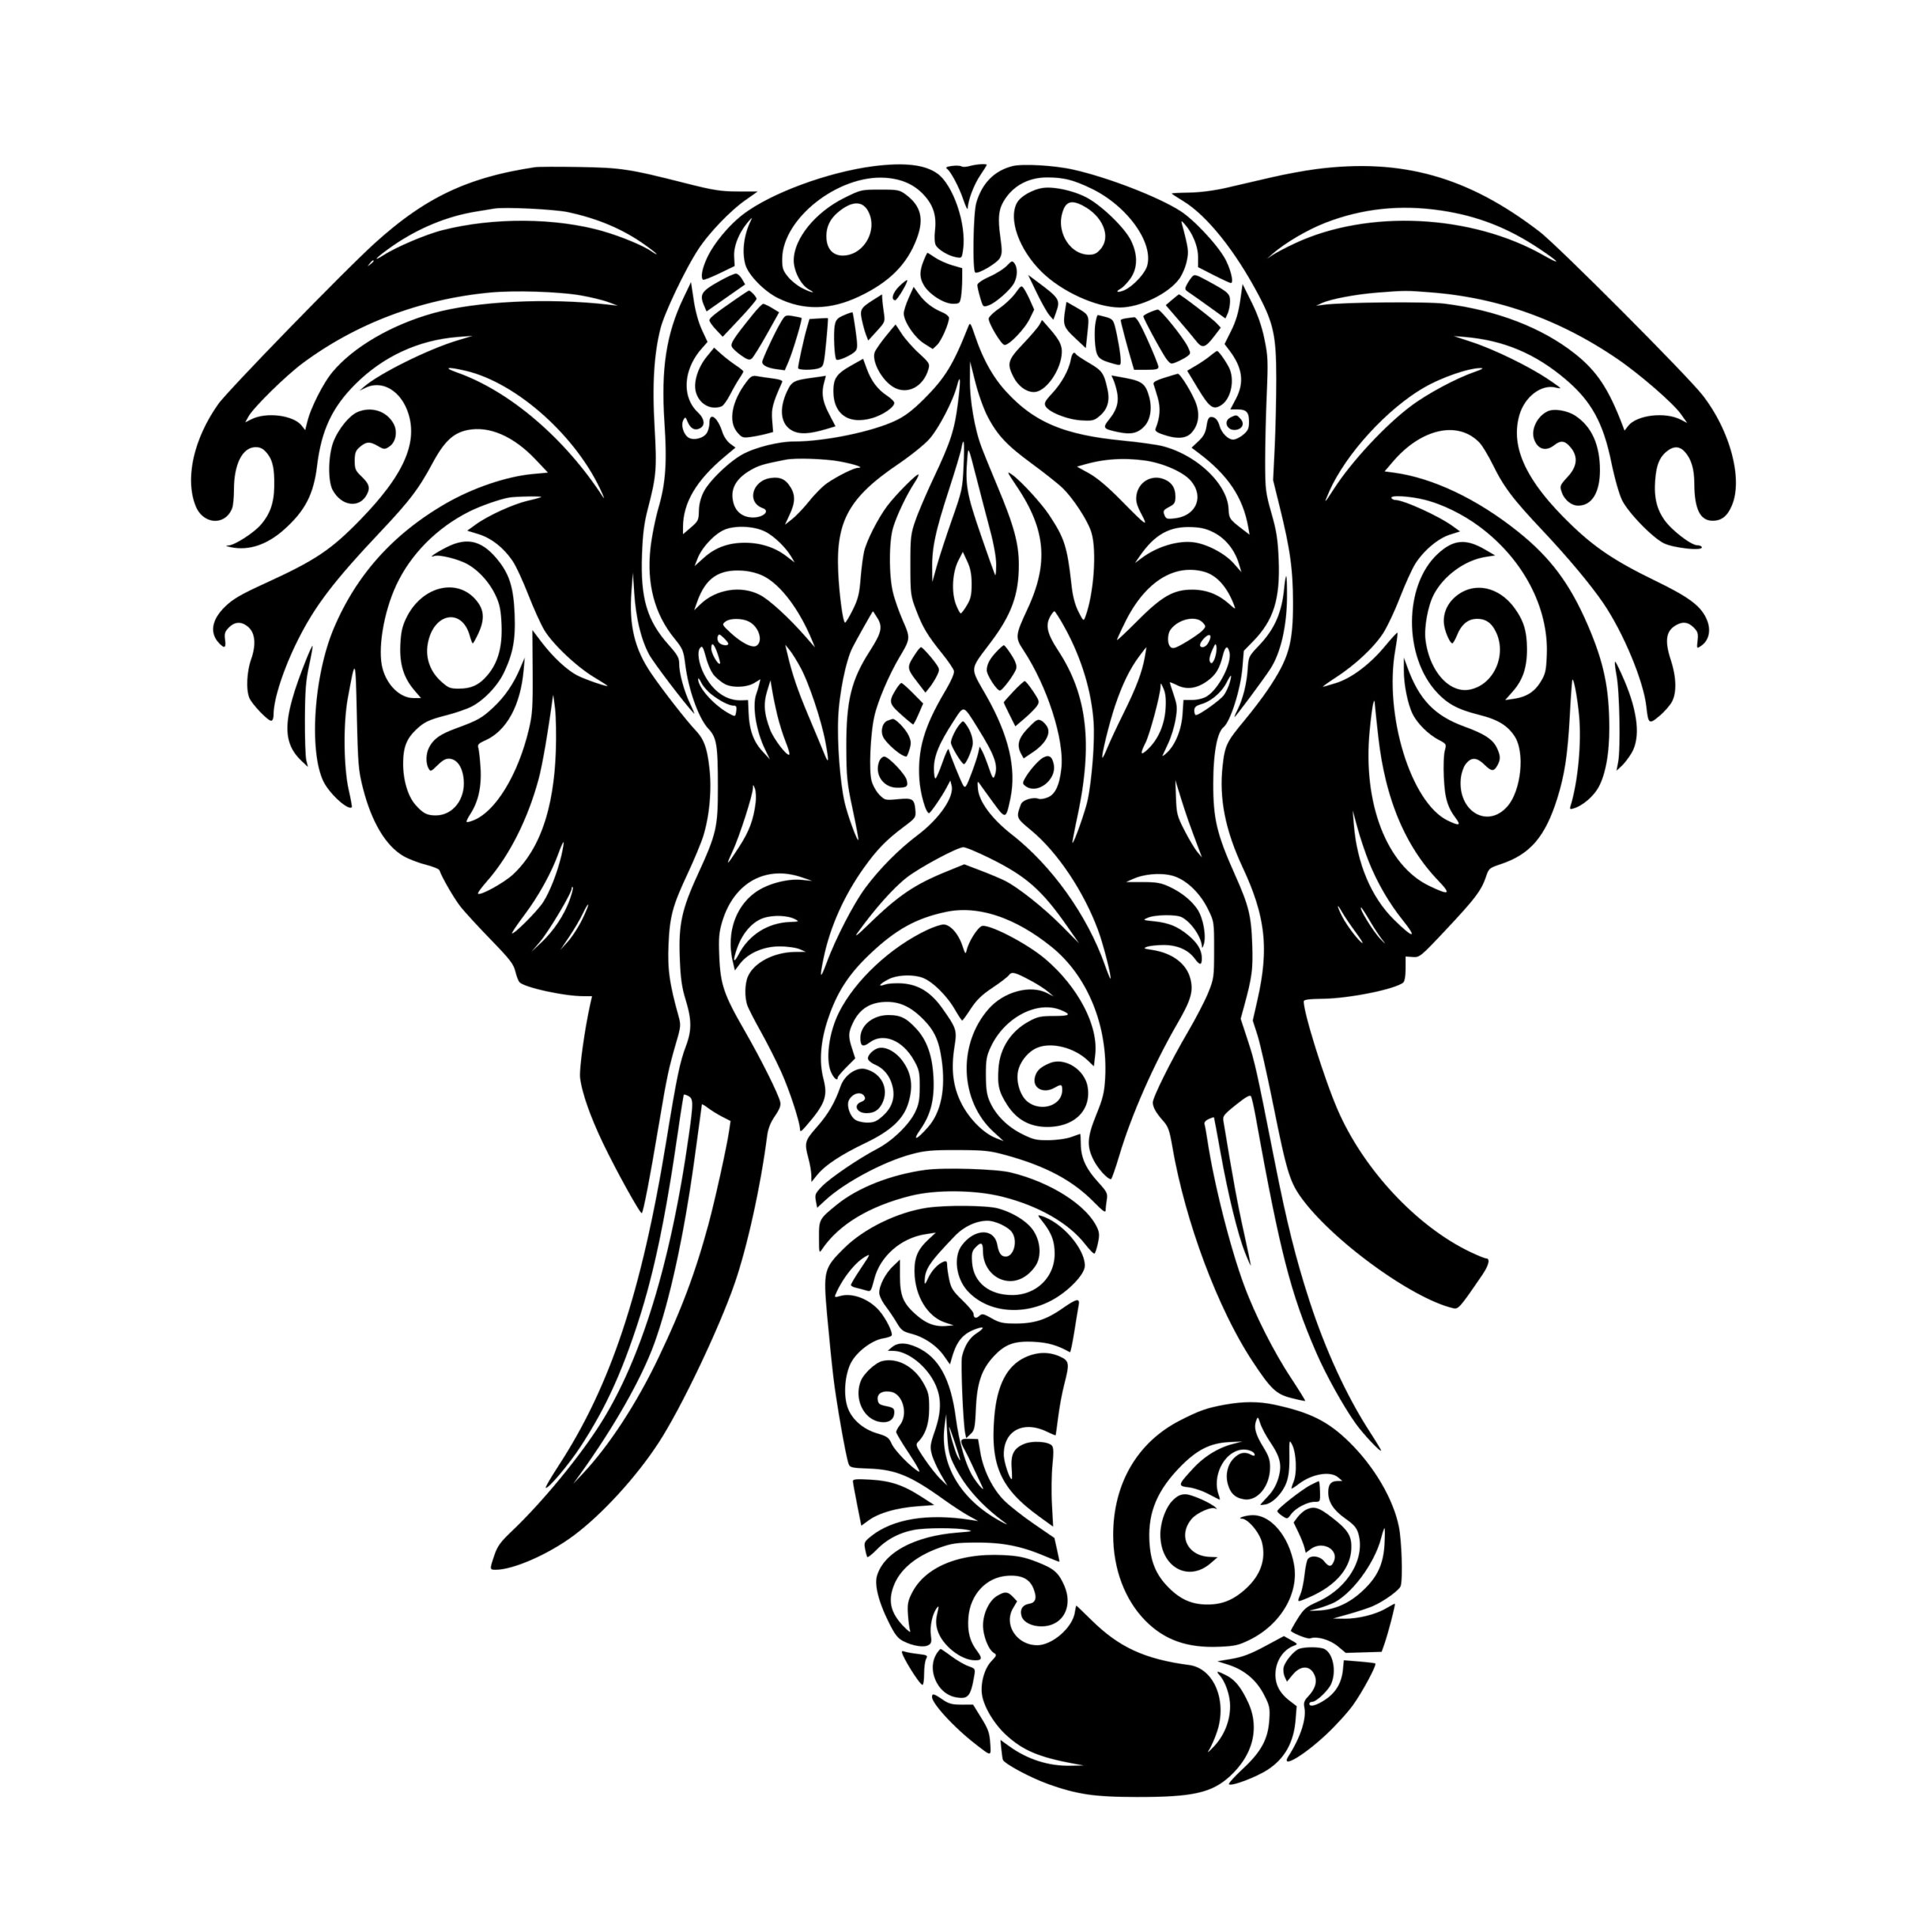 Tribal Elephant Head SVG Image for Cricut, Silhouette, and Laser